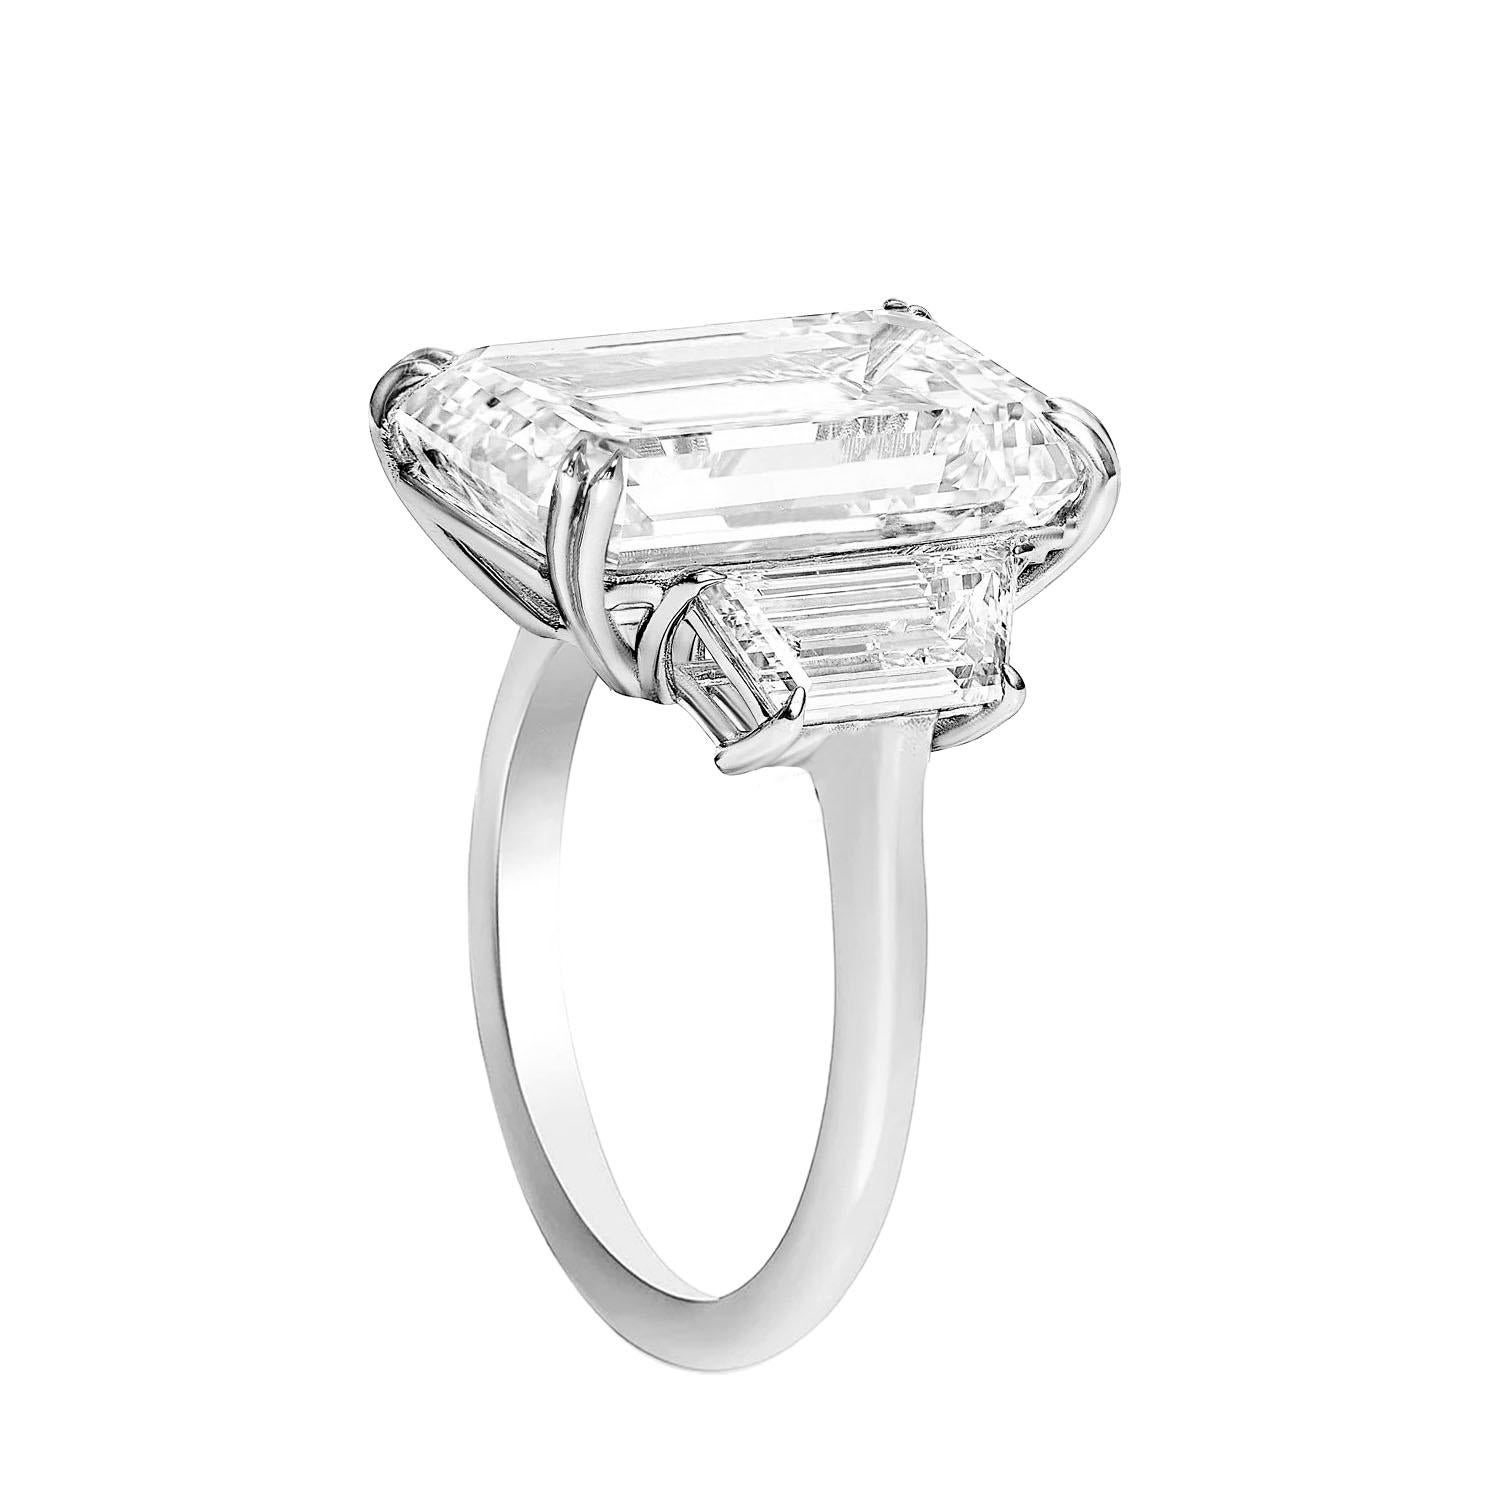 exquisite piece of jewelry! The emerald cut diamond weighing 10 carats with F color and VVS1 clarity would undoubtedly be dazzling on its own, but paired with trapezoid-shaped diamonds totaling 1 carat each, it adds even more elegance and